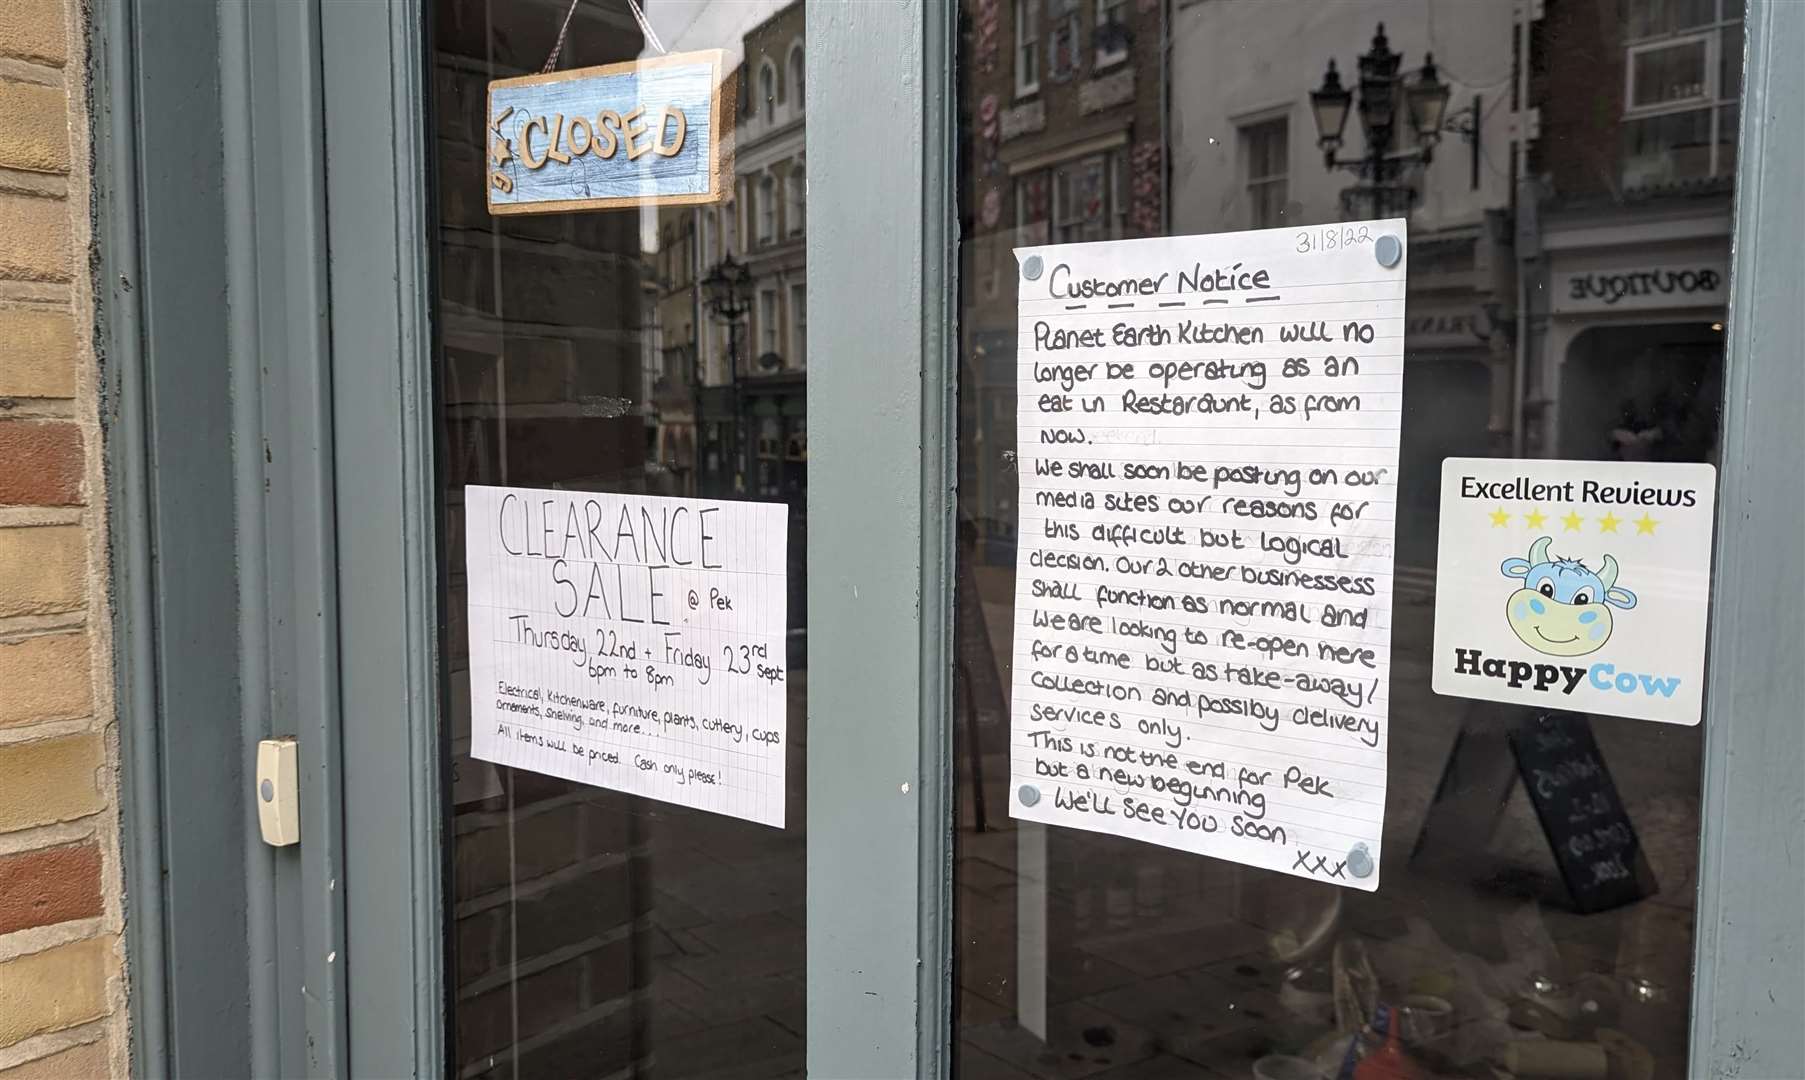 The vegan restaurant has staged a clearance sale after closing its doors